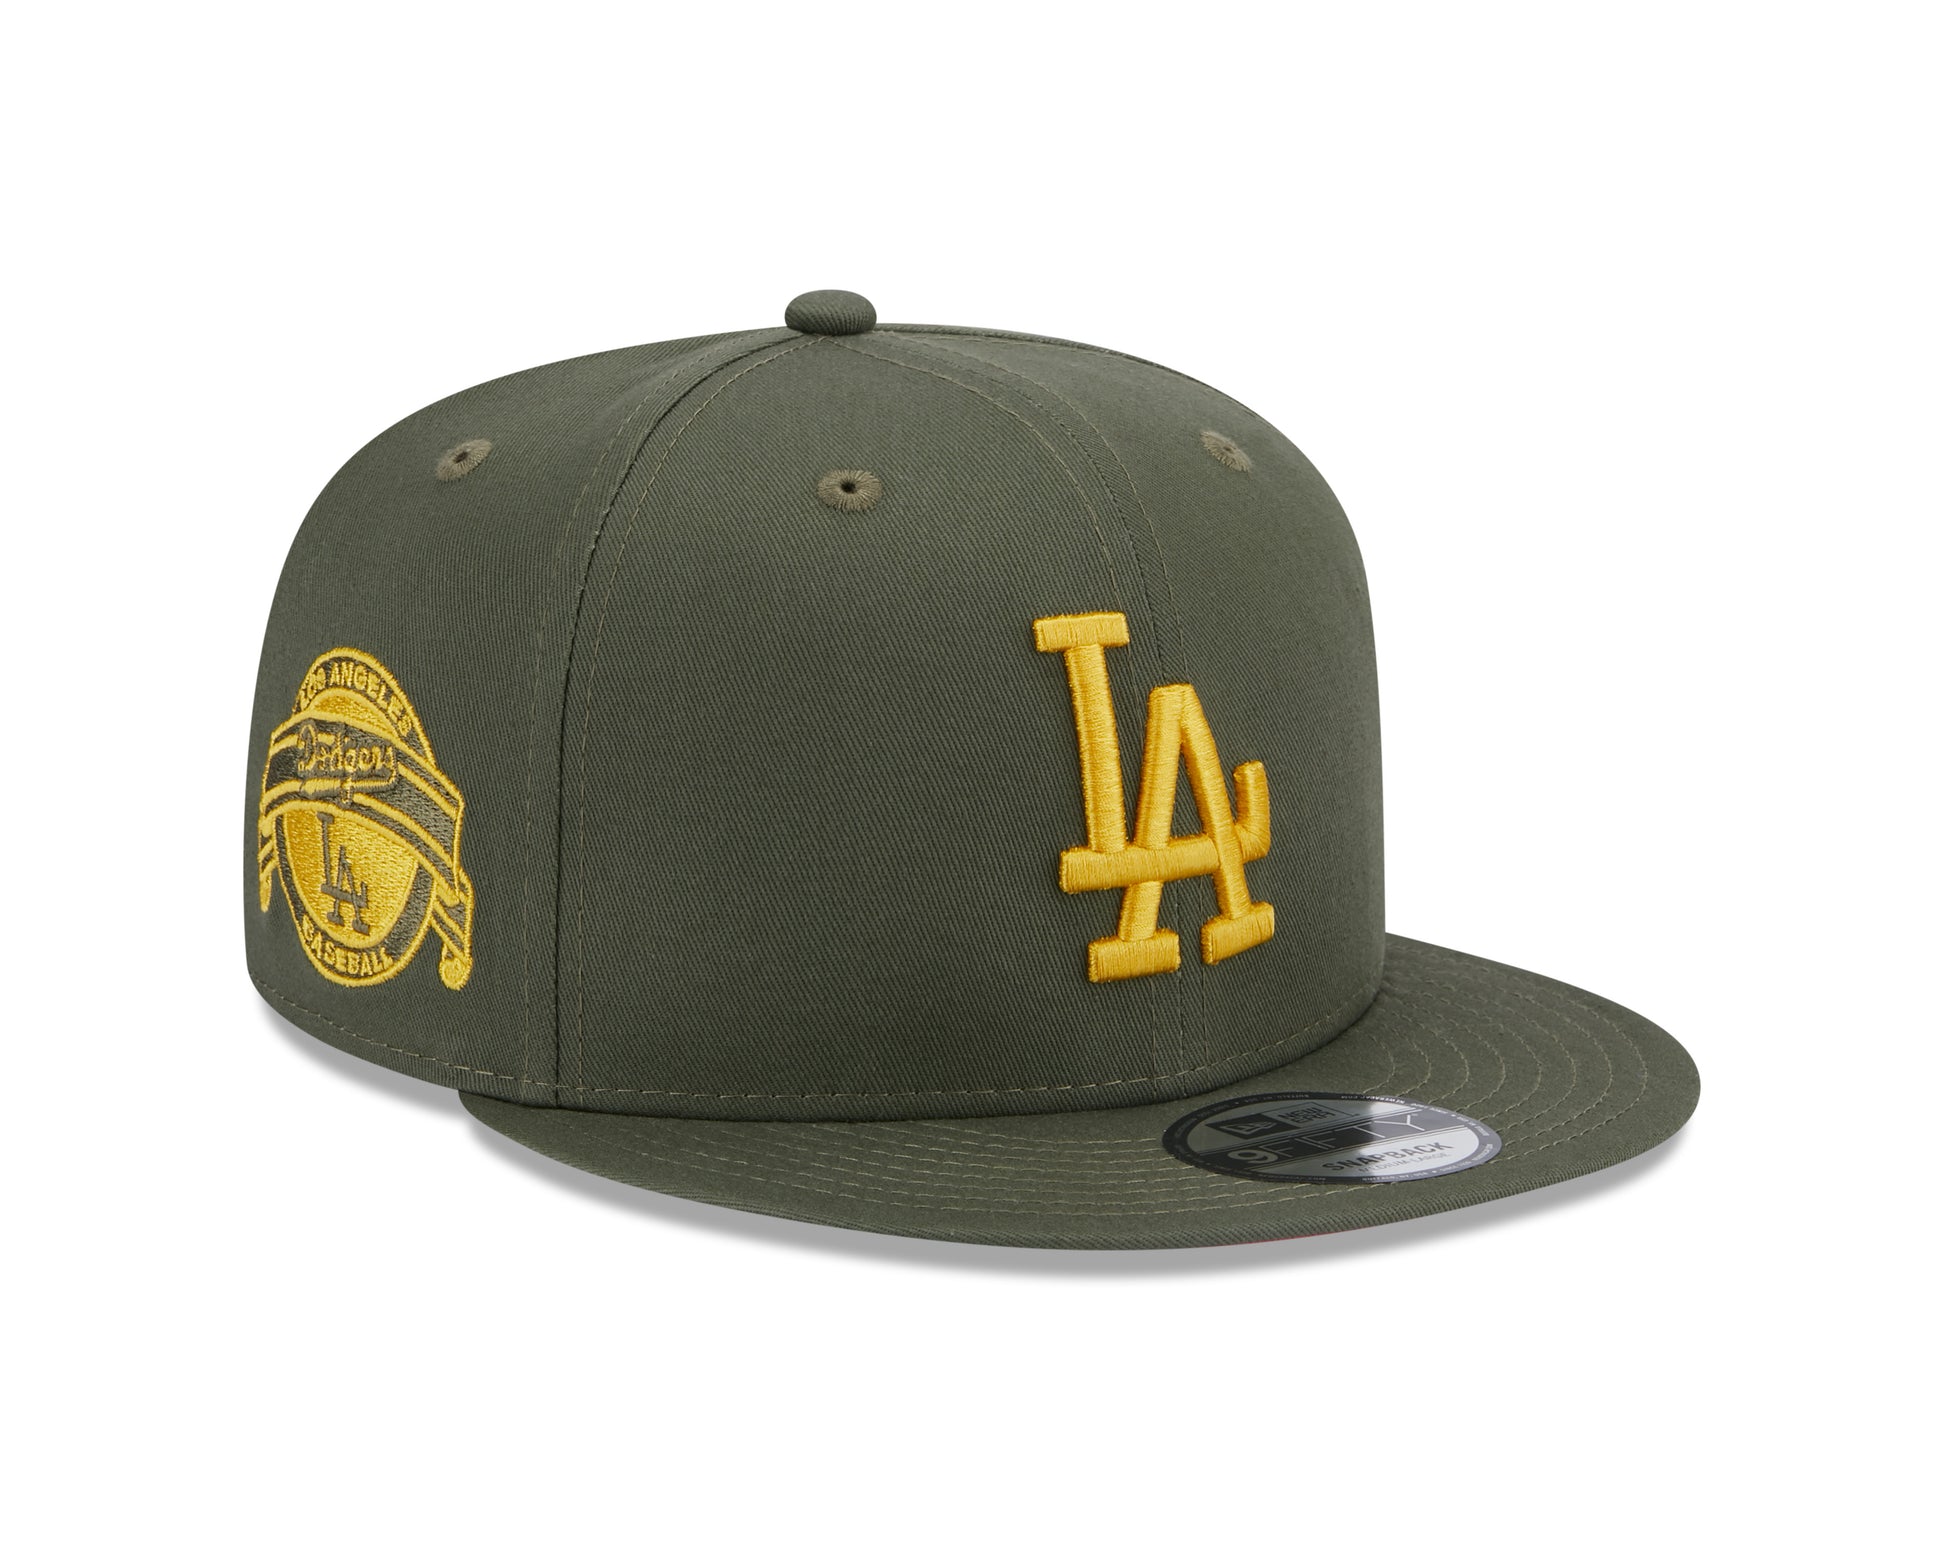 New Era 9Fifty Side Patch Los Angeles Dodgers - Olive/Yellow - Headz Up 